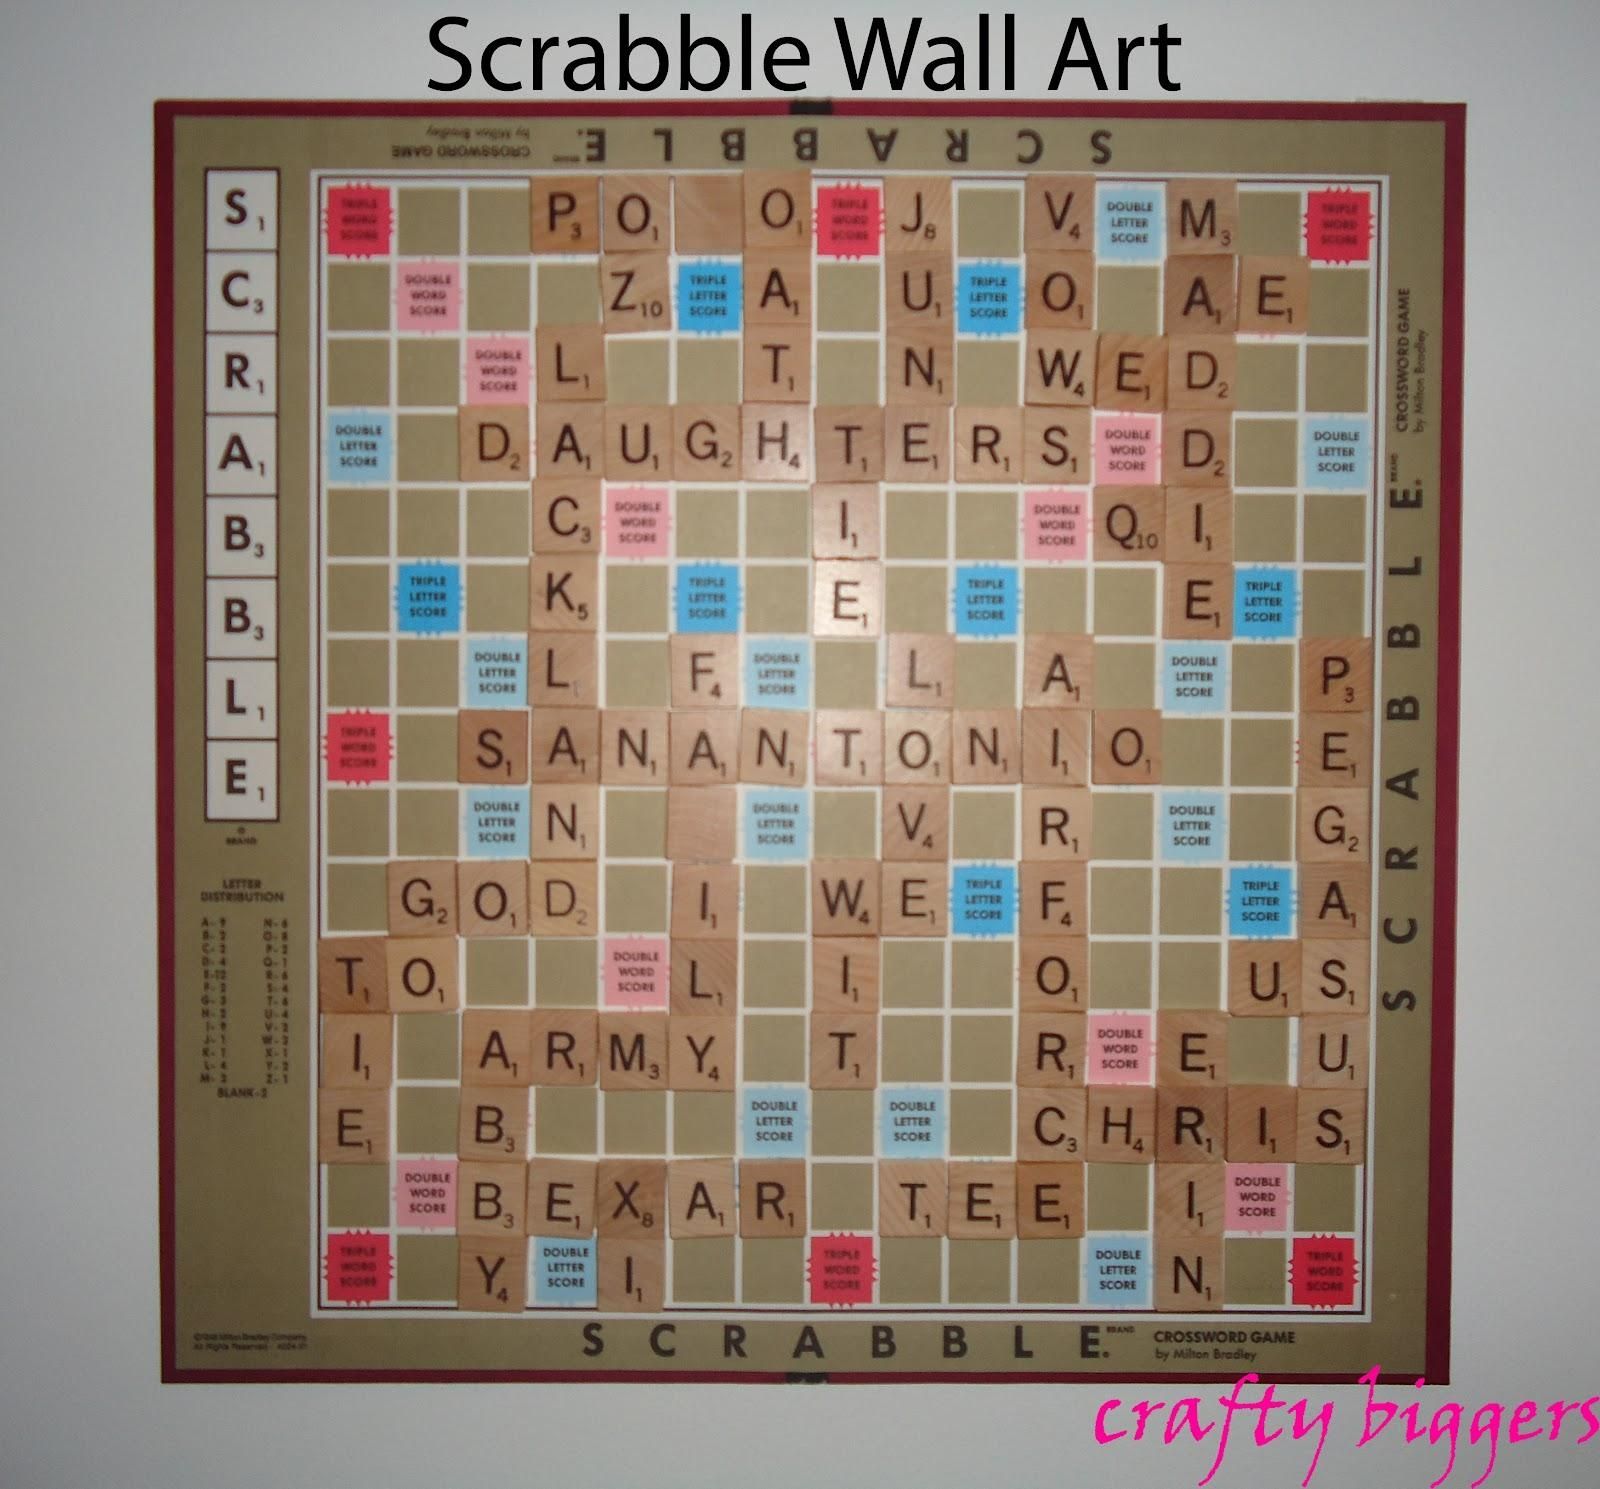 Crafty Biggers: Scrabble Wall Art Throughout Scrabble Names Wall Art (View 2 of 20)